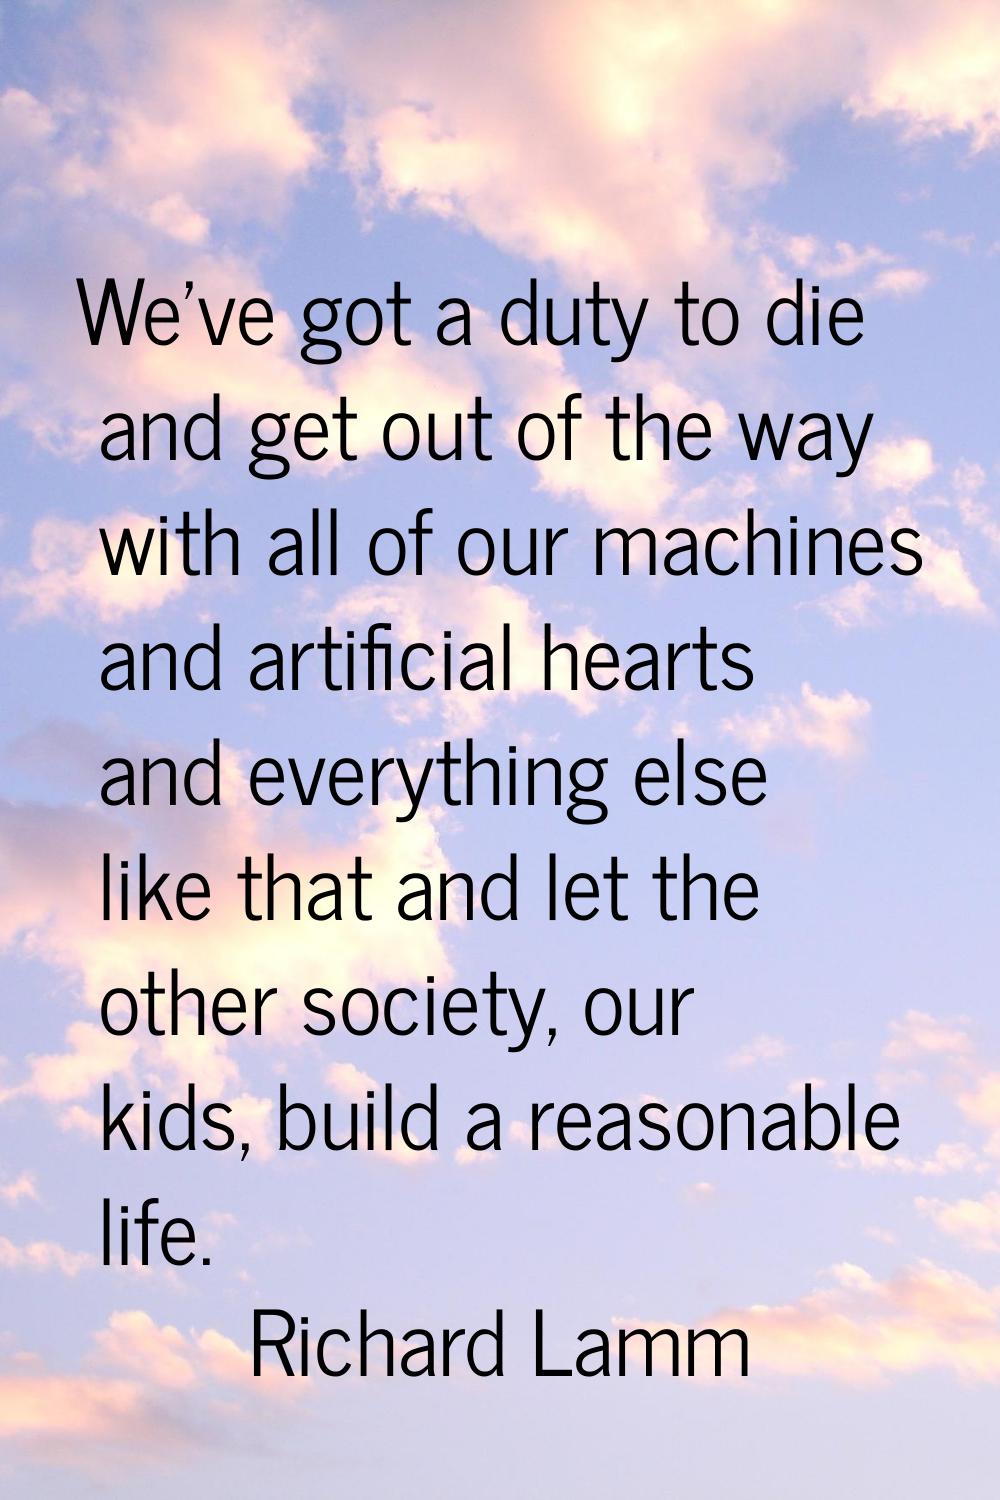 We've got a duty to die and get out of the way with all of our machines and artificial hearts and e